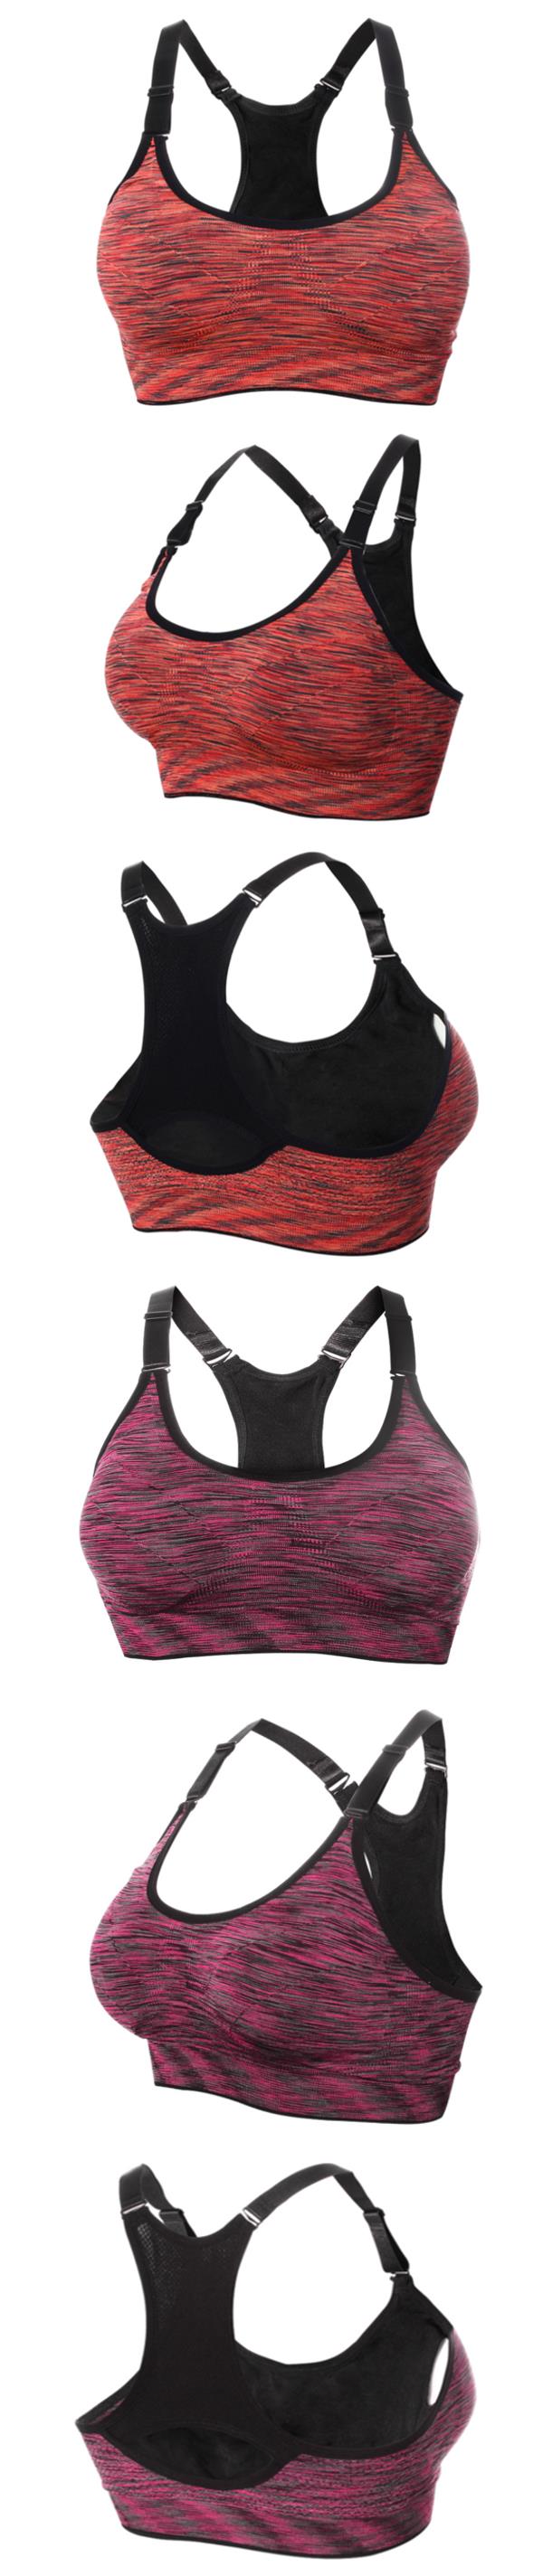 Women-Space-Dyeing-Wireless-Bra-Shakeproof-Stretch-Push-Up-Bras-Top-Seamless-Padded-Vest-1070058-2